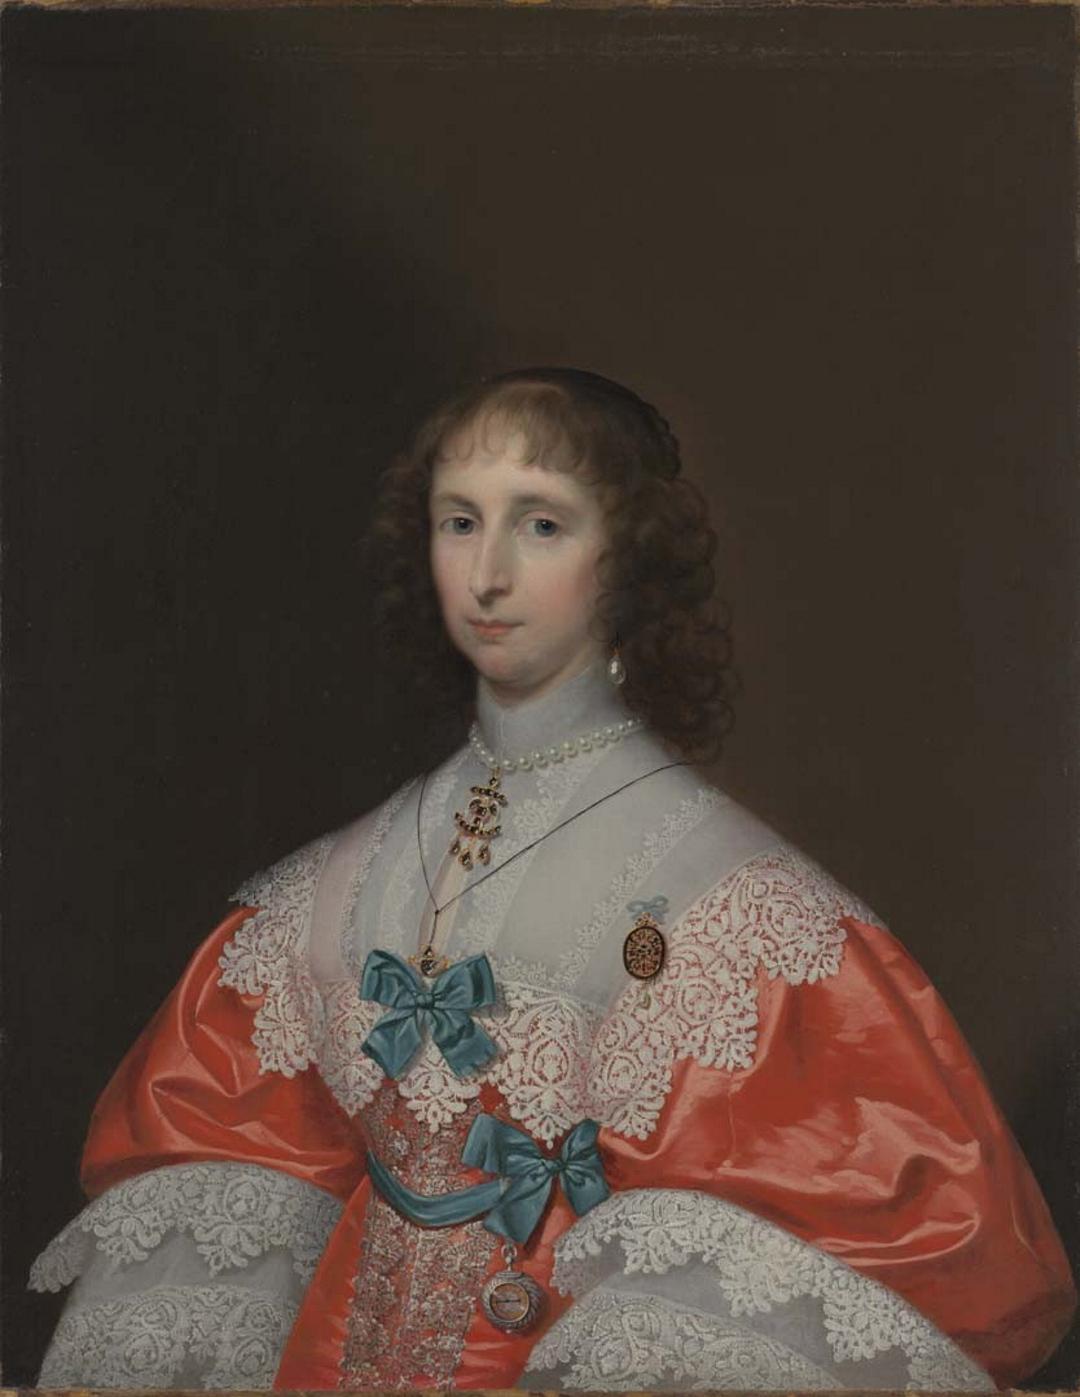 Slider: Near-infrared, Portrait of a lady, half length, in a red and white dress with blue bows c.1640 JANSSEN VAN CEULEN, Cornelius